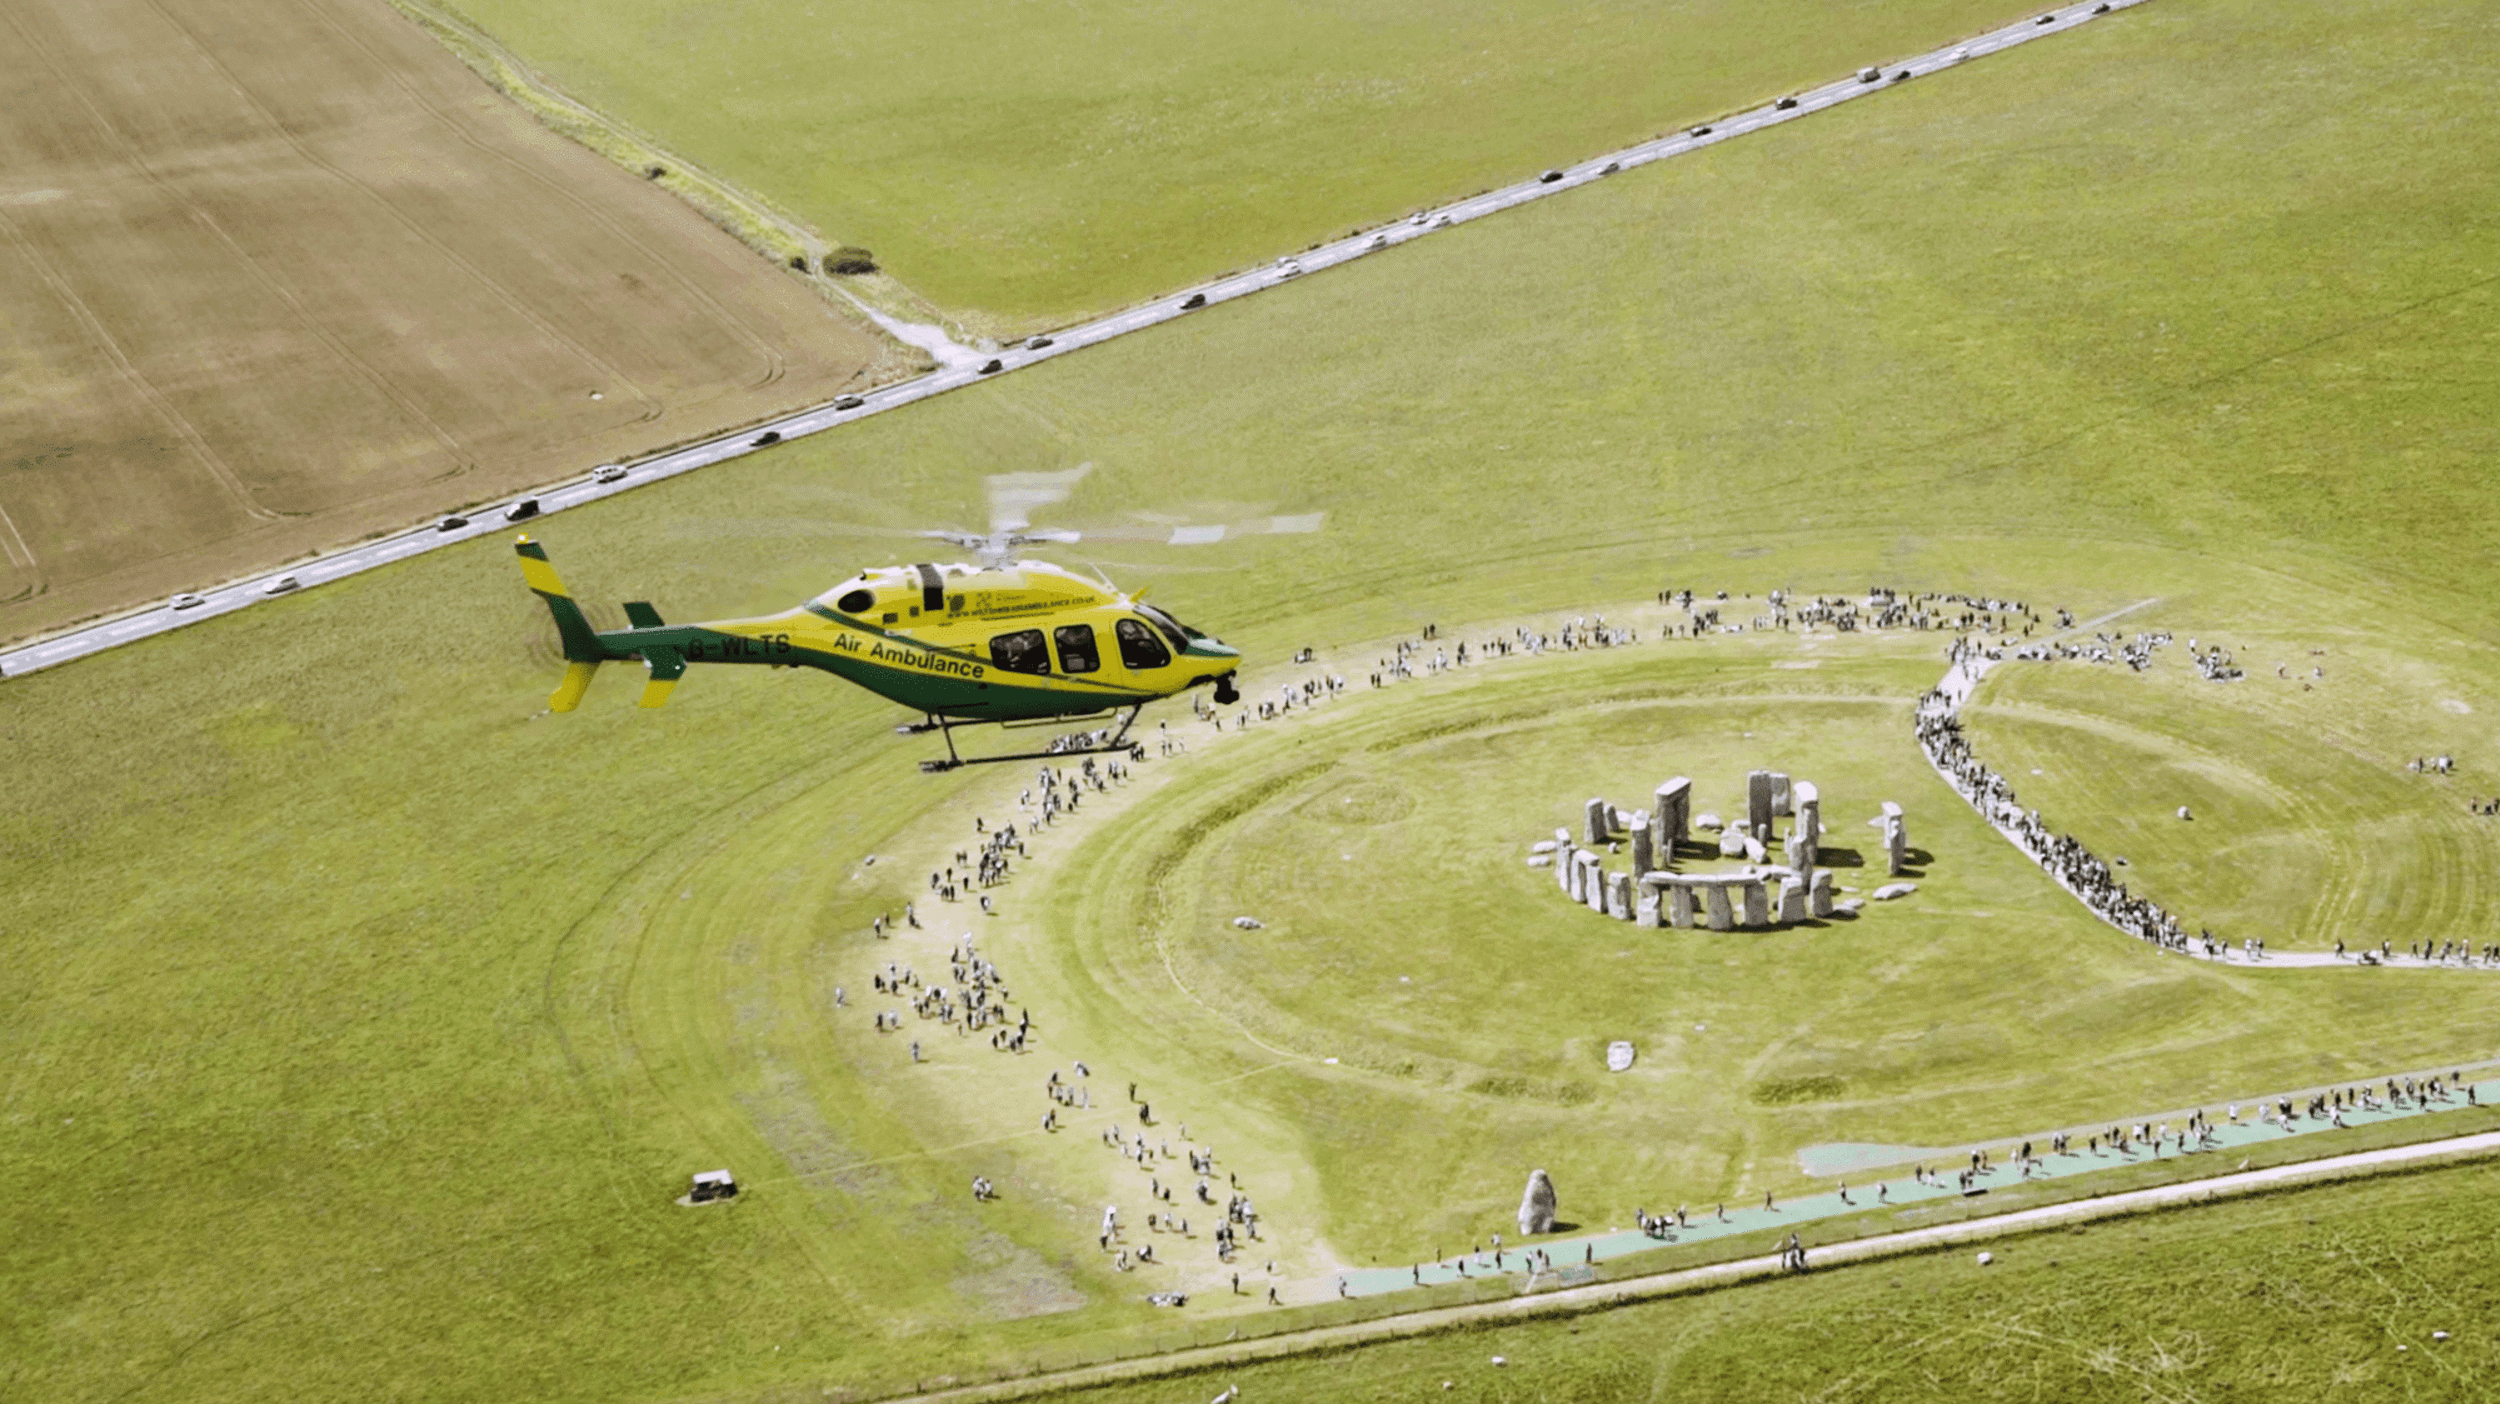 The helicopter flying over Stone Henge with lots of visitors walking around.